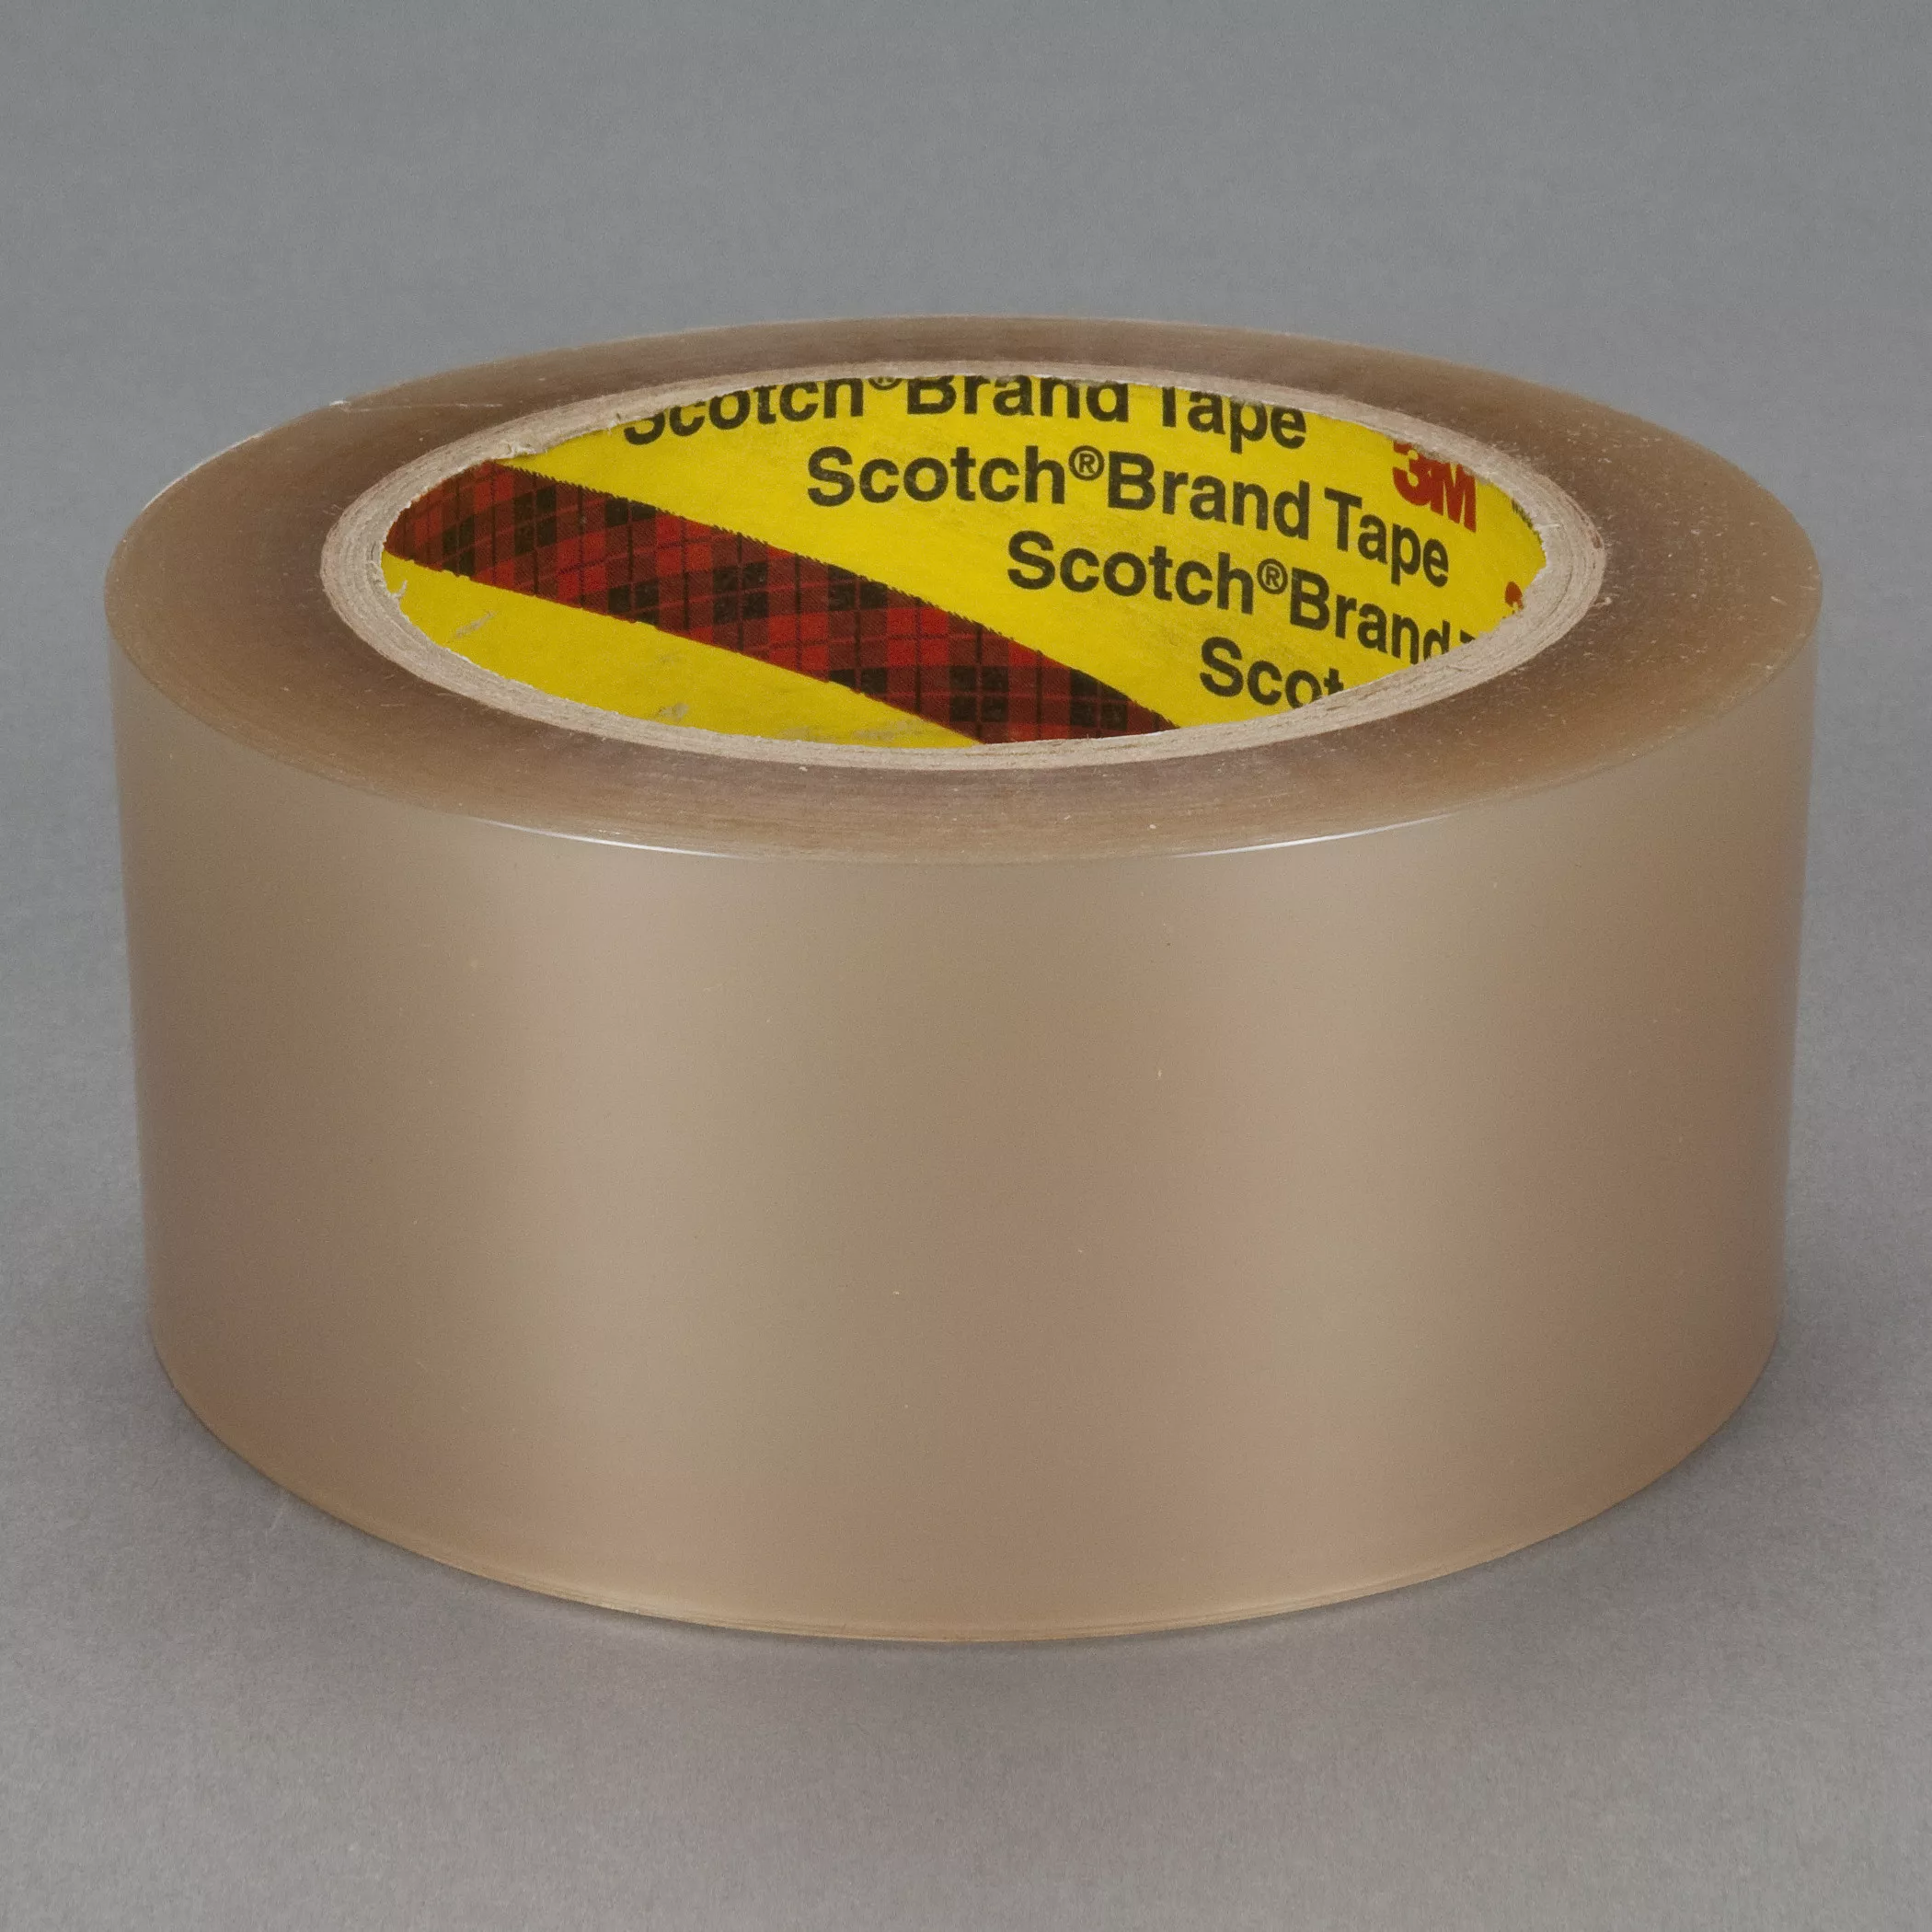 3M™ Polyester Tape 8911, Transparent, 2 in x 72 yd, 2.3 mil, 24
Roll/Case